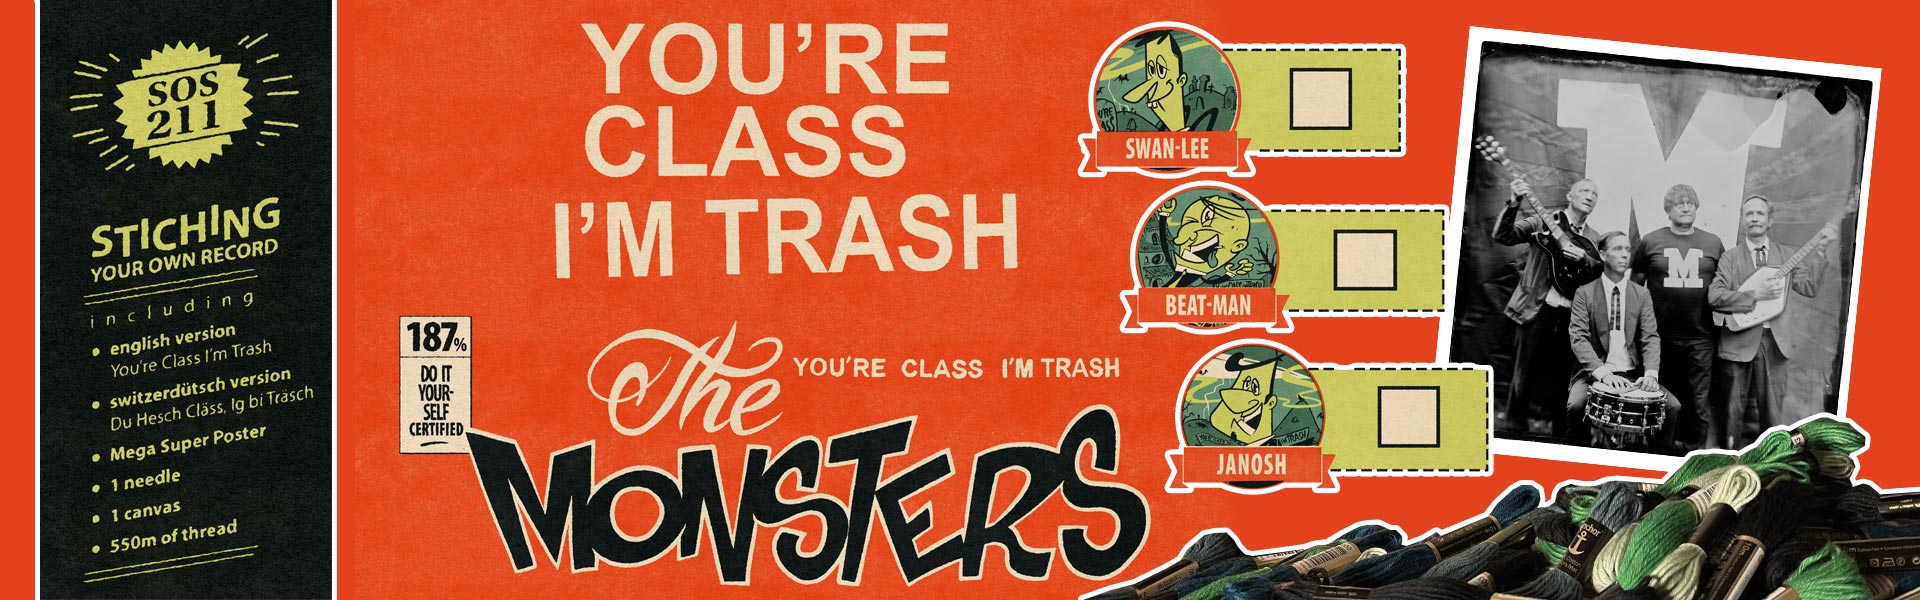 The Monsters - You're class, I'm trash